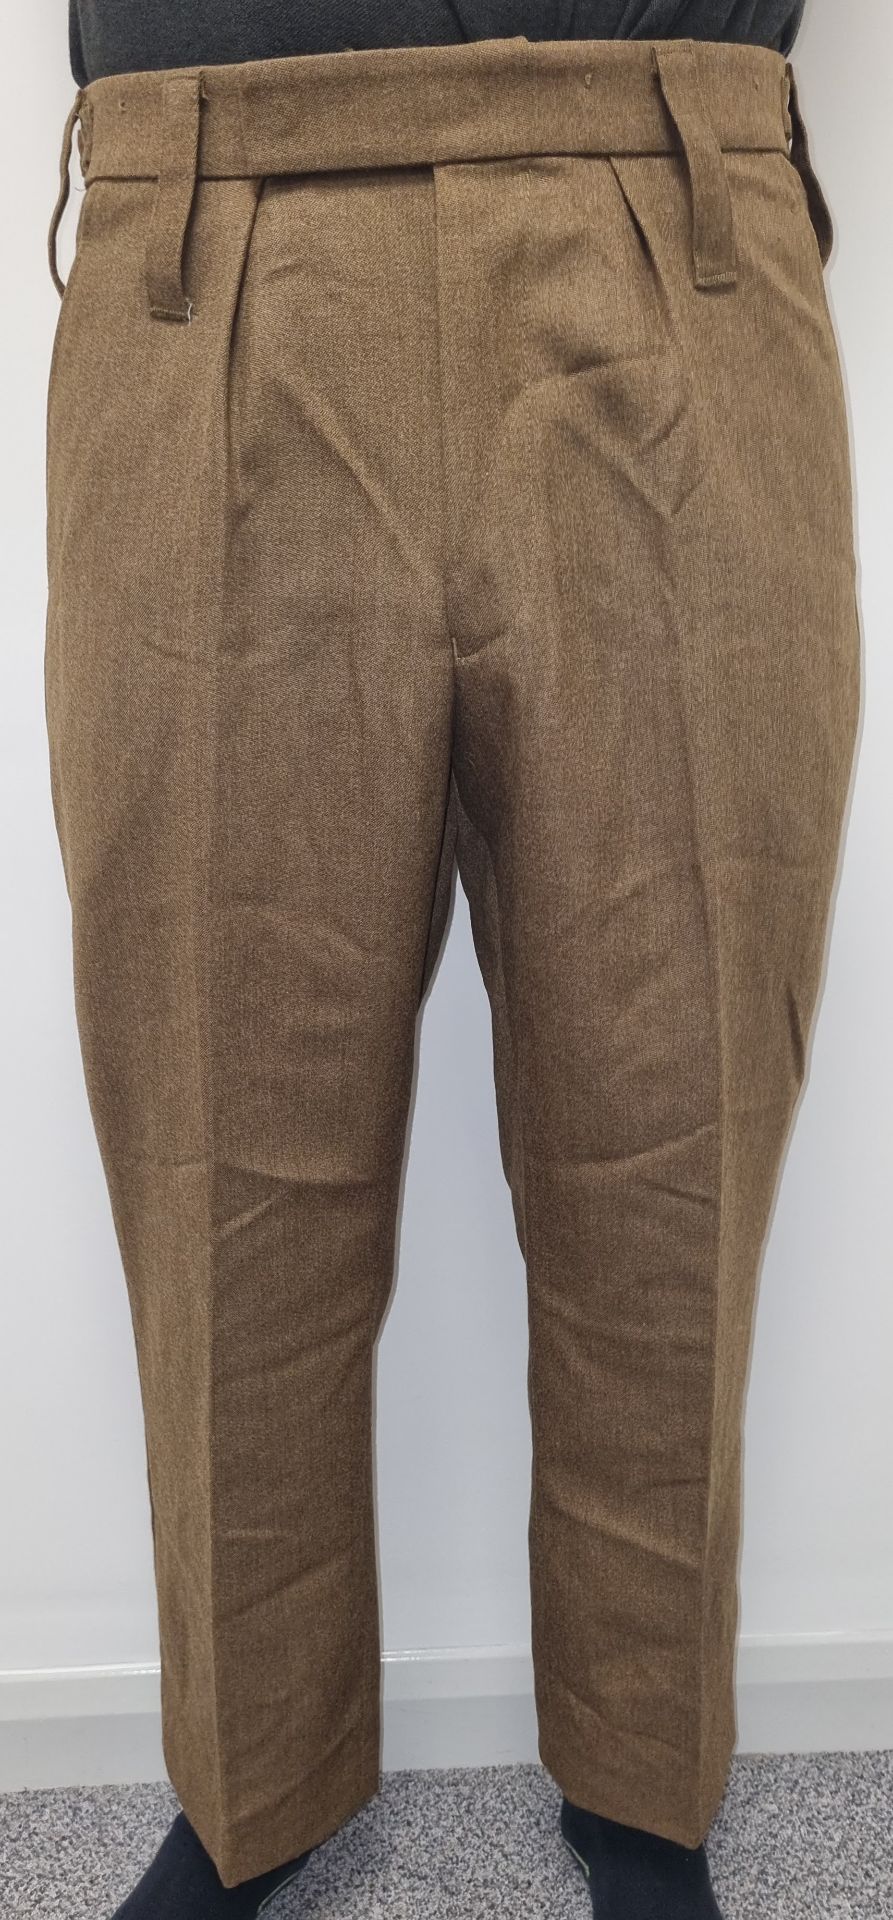 40x British Army No. 2 Dress trousers - mixed grades and sizes